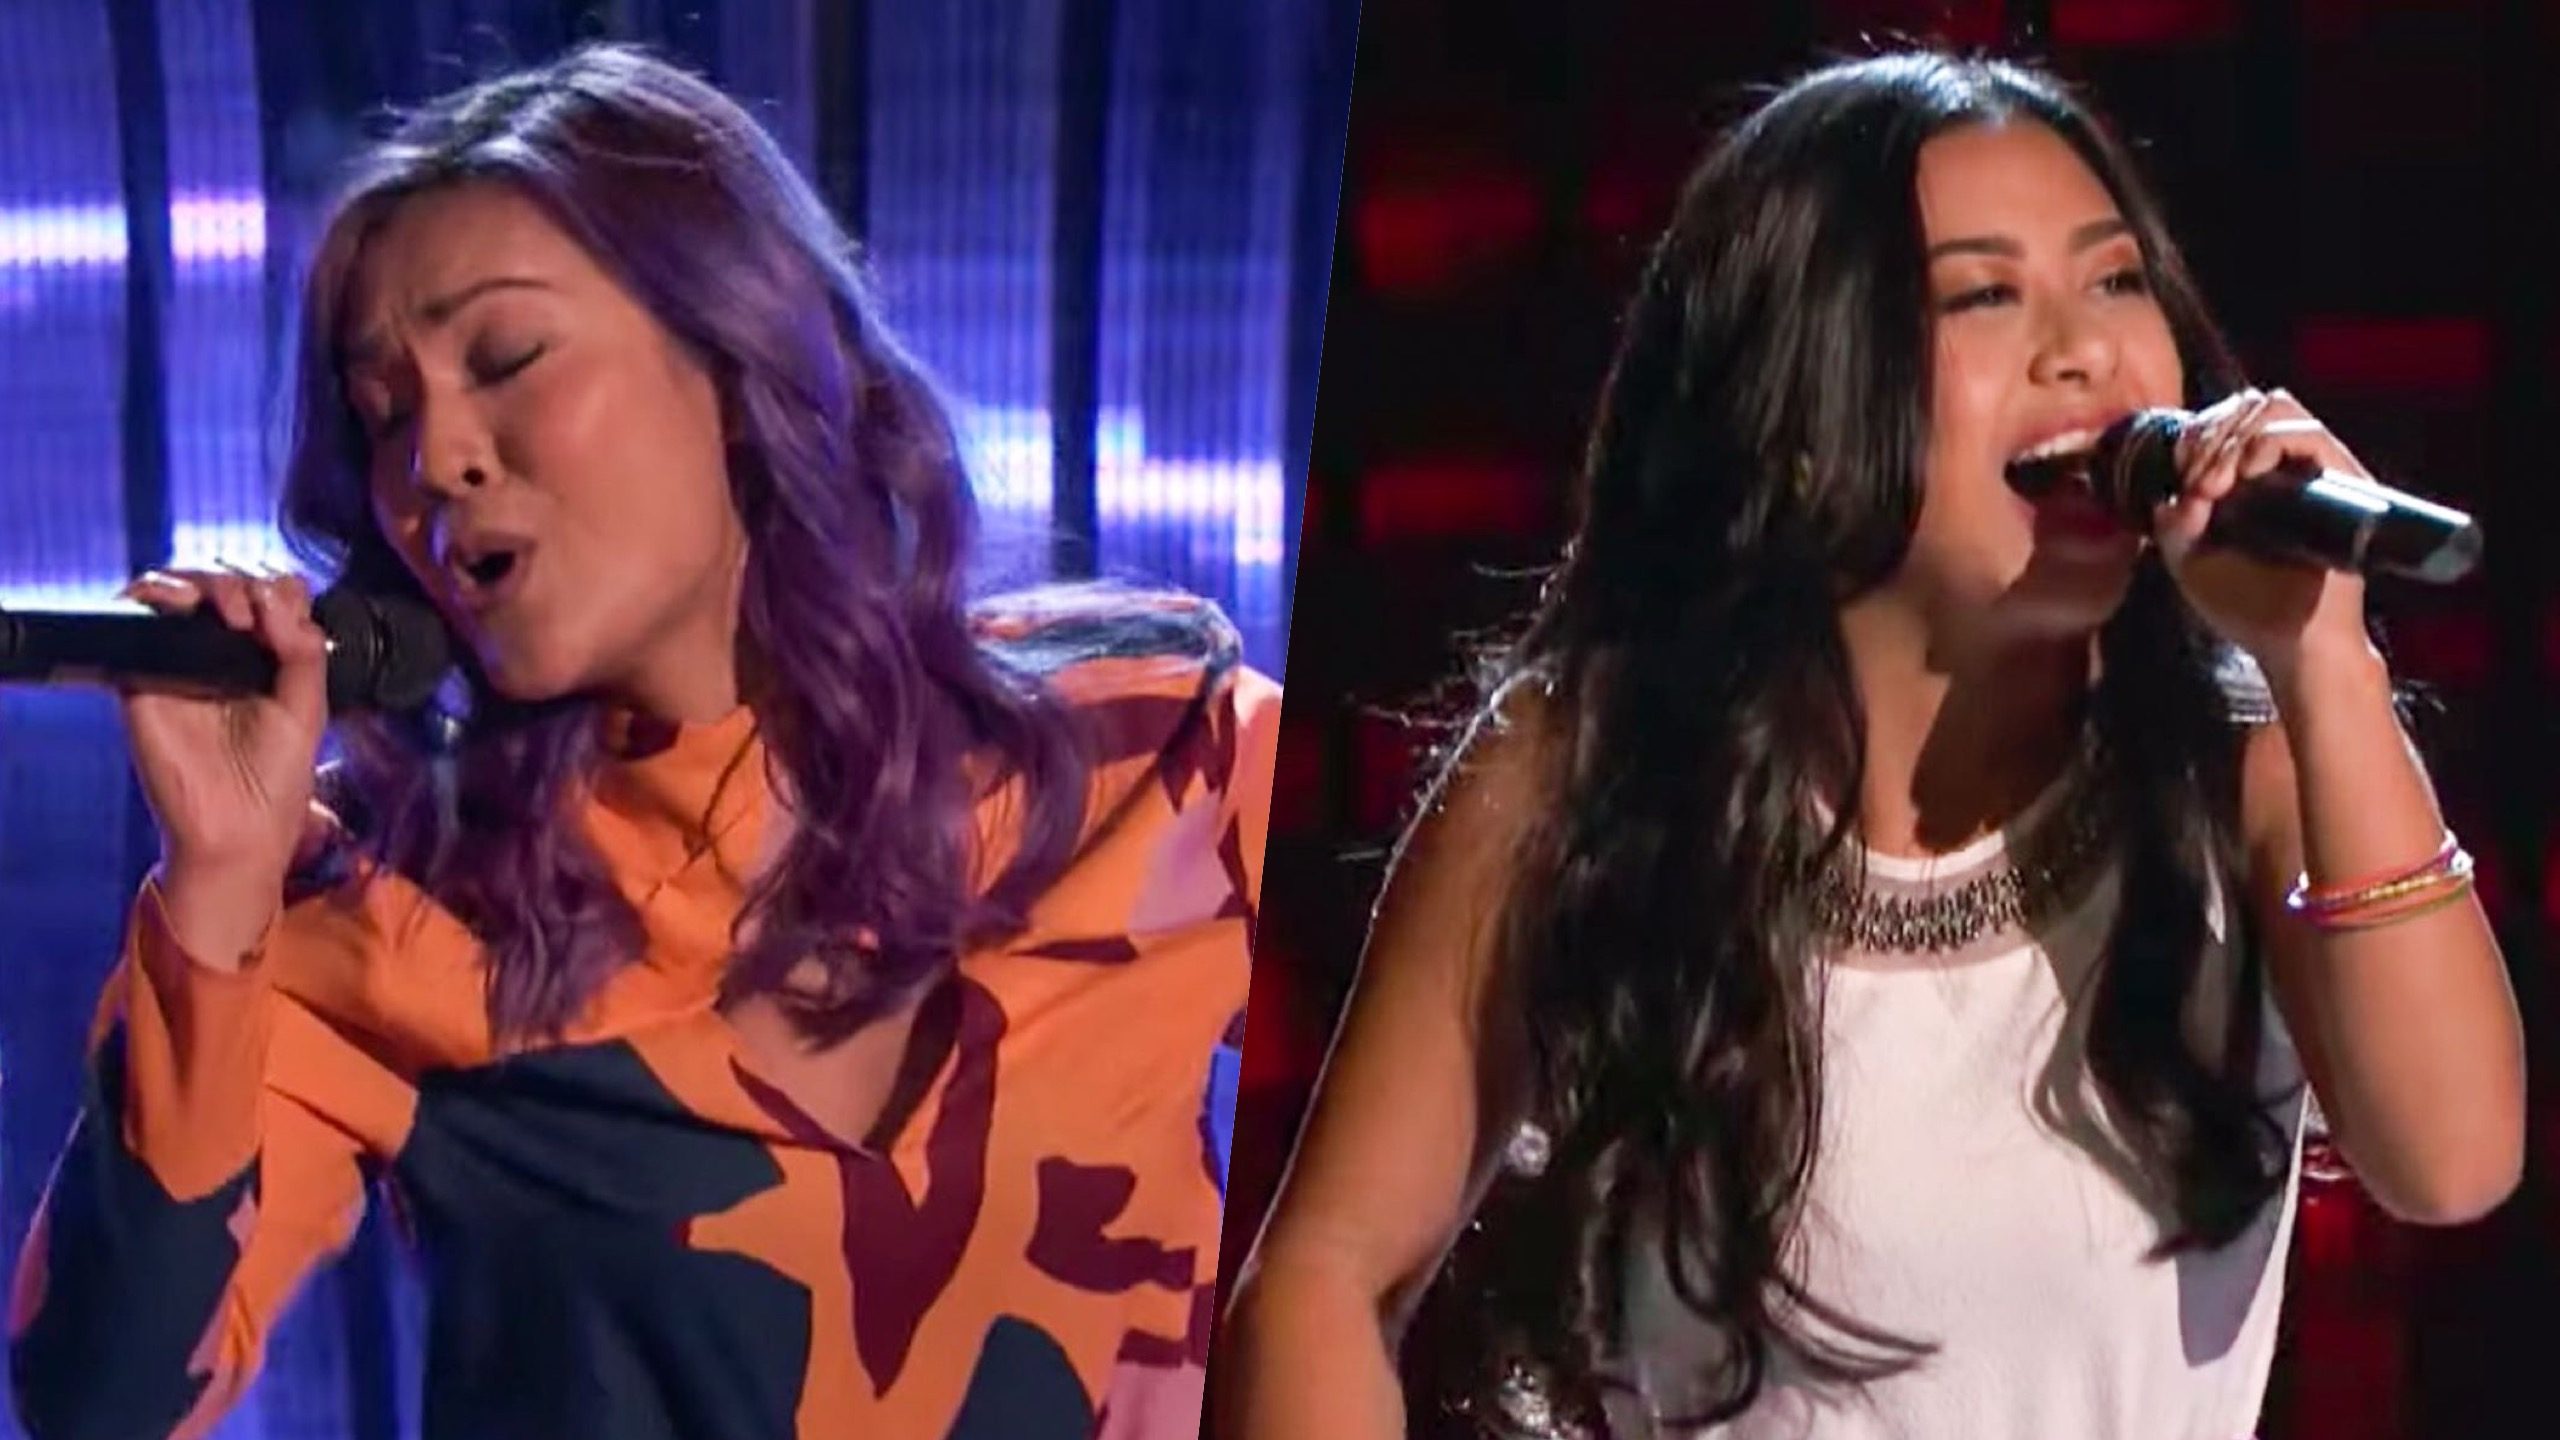 WATCH: Fil-Am singers make it through ‘The Voice’ blind auditions